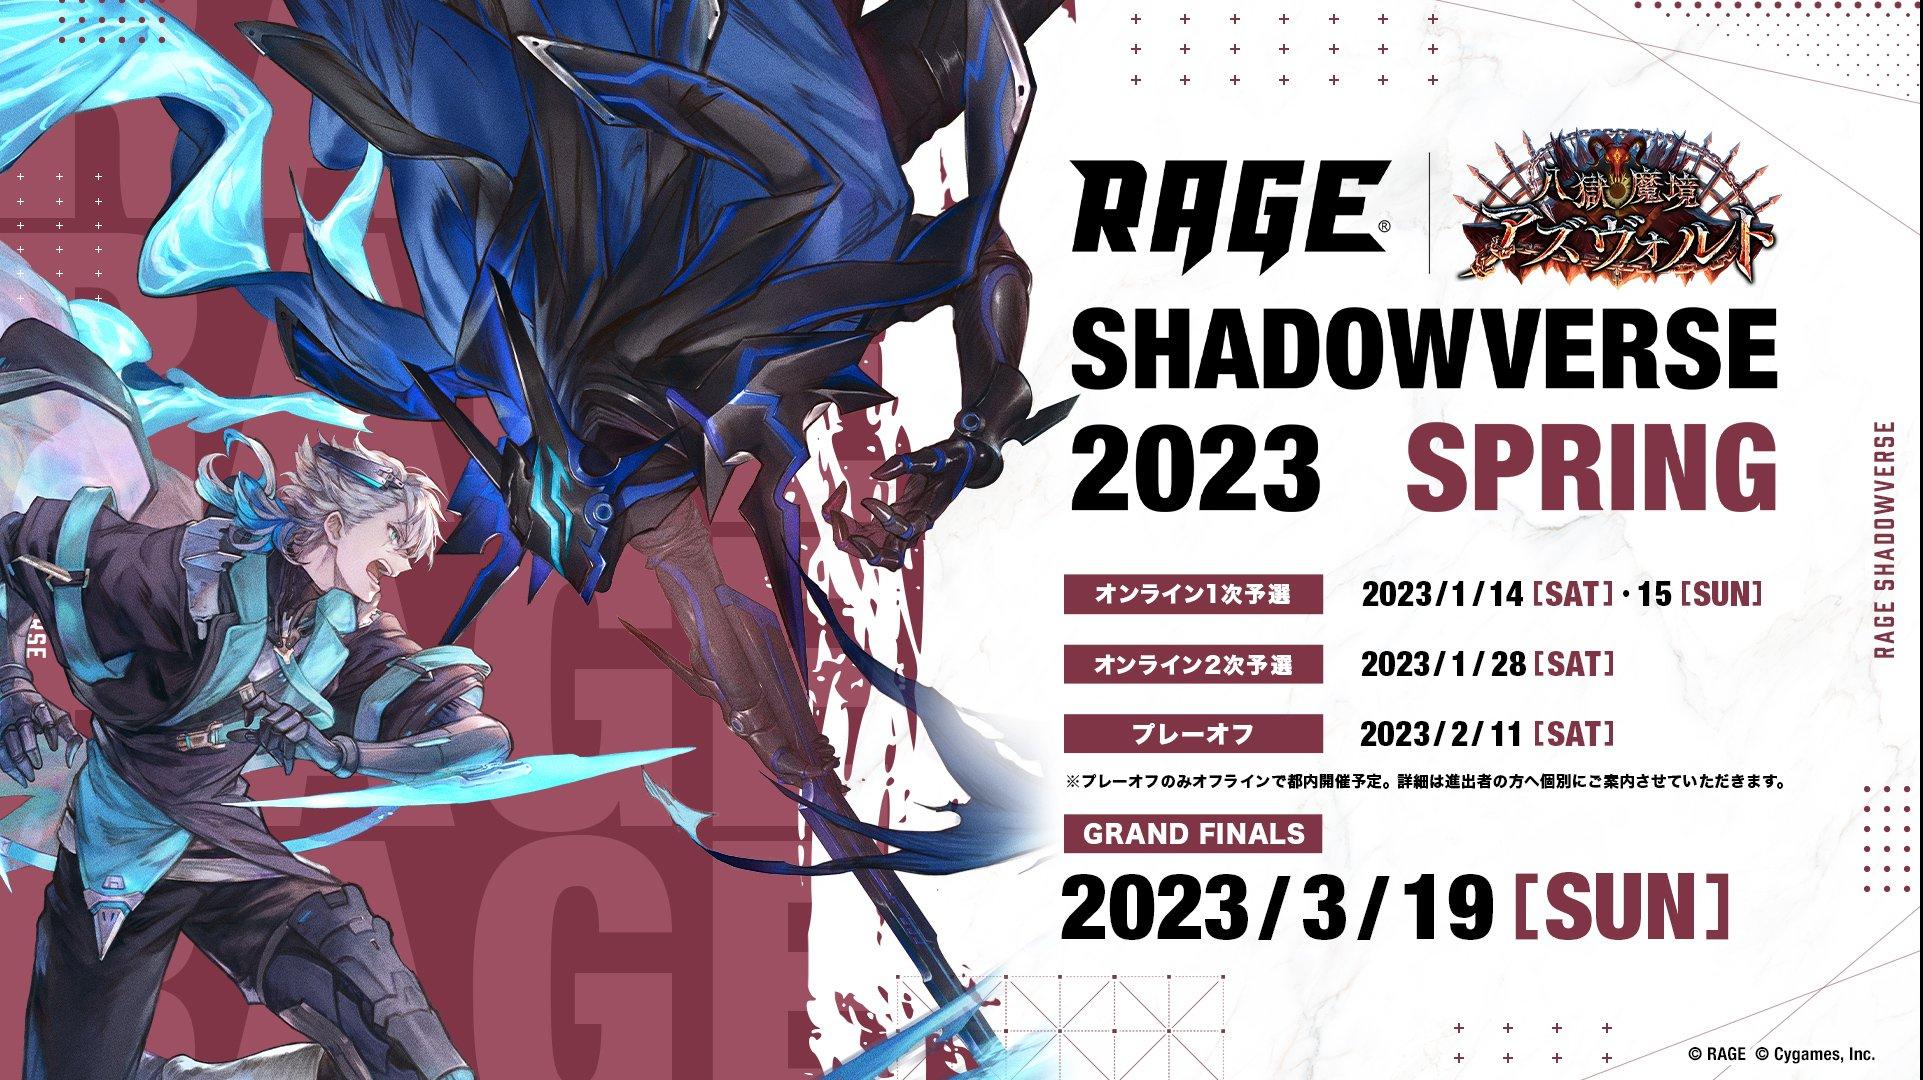 RAGE Shadowverse 2023 Spring feature image